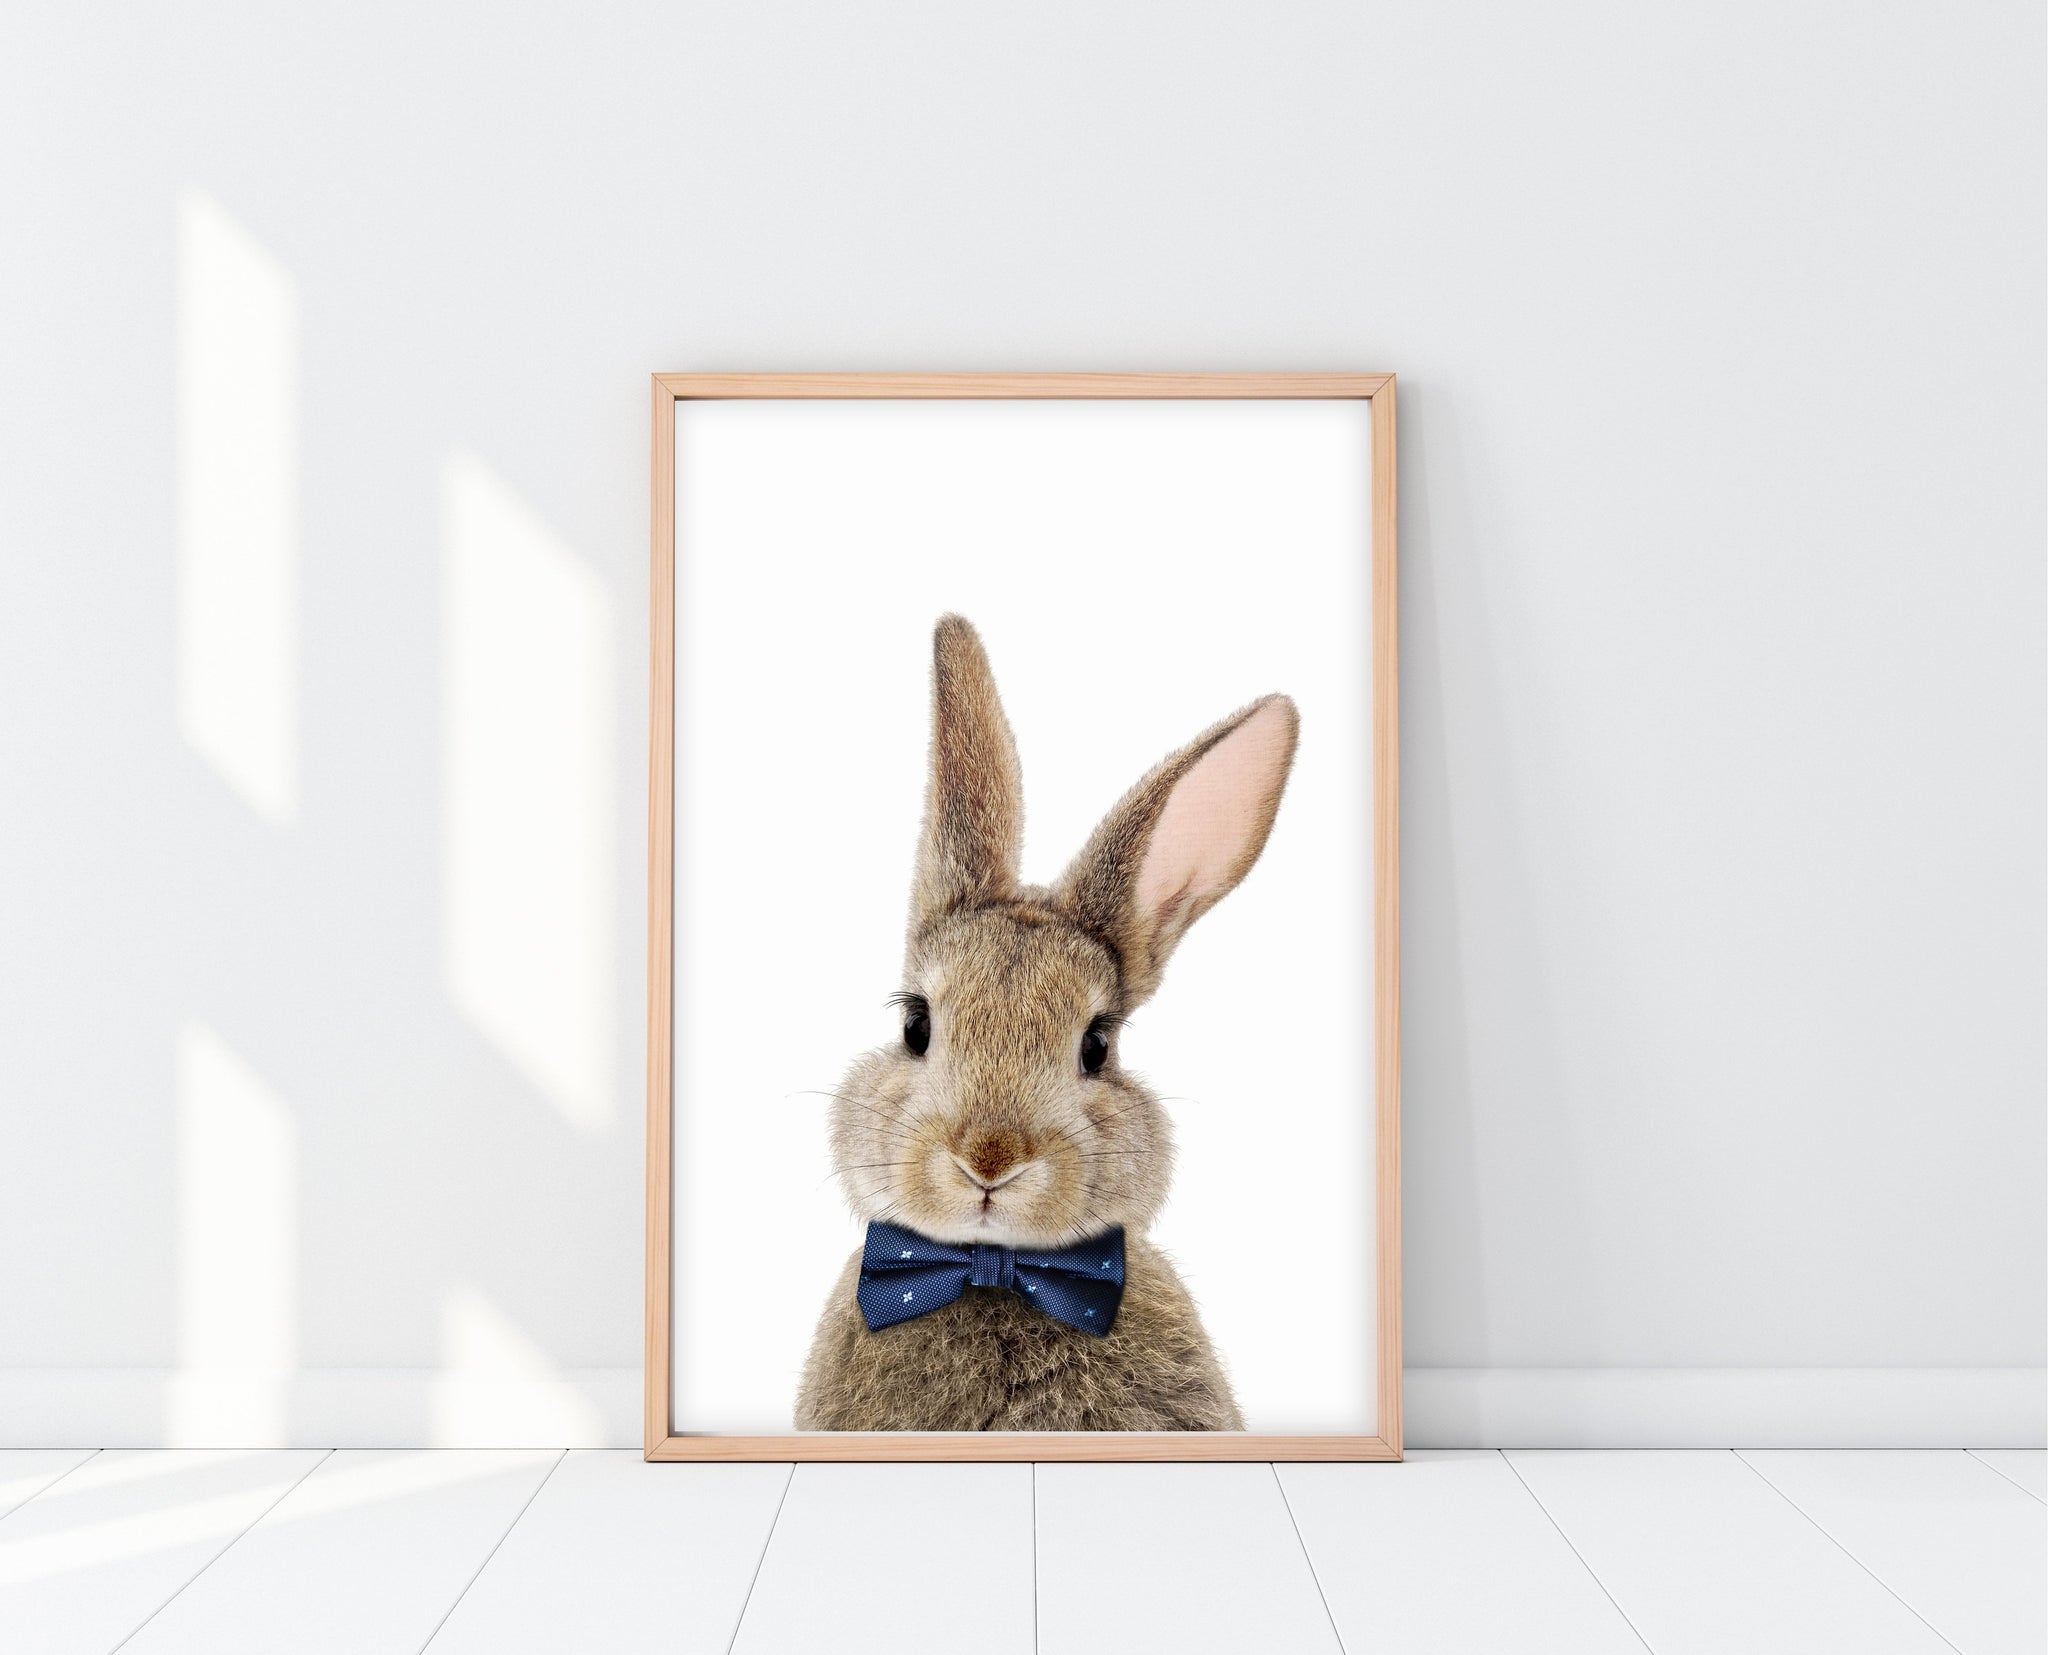 Bunny Pictures For Nursery | PeekABoo Bunny With Bow Tie | Ollie + Hank